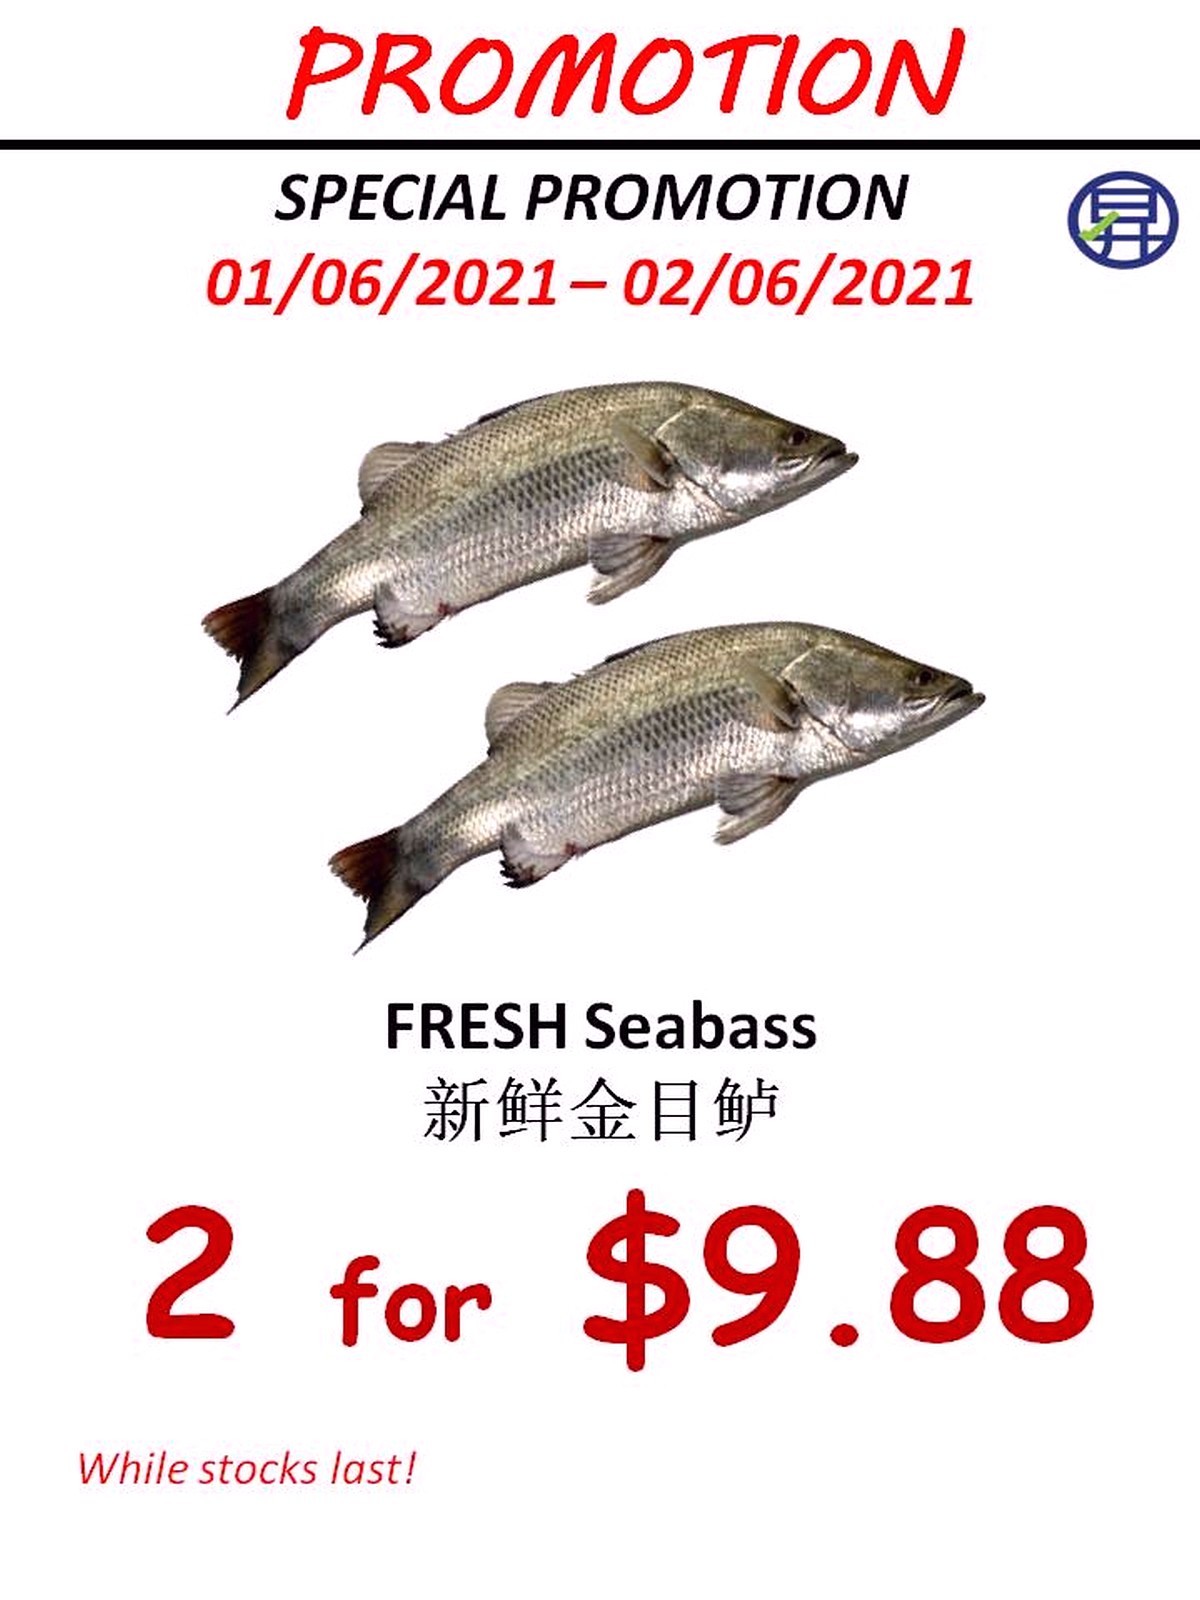 Sheng-Siong-Today-Fresh-Fish-Seafood-Promotion-2021-Singapore-002 Now till 17 Jun  2021: Sheng Siong Mega Promotion! 2 Fresh Seabass for $9.88 only